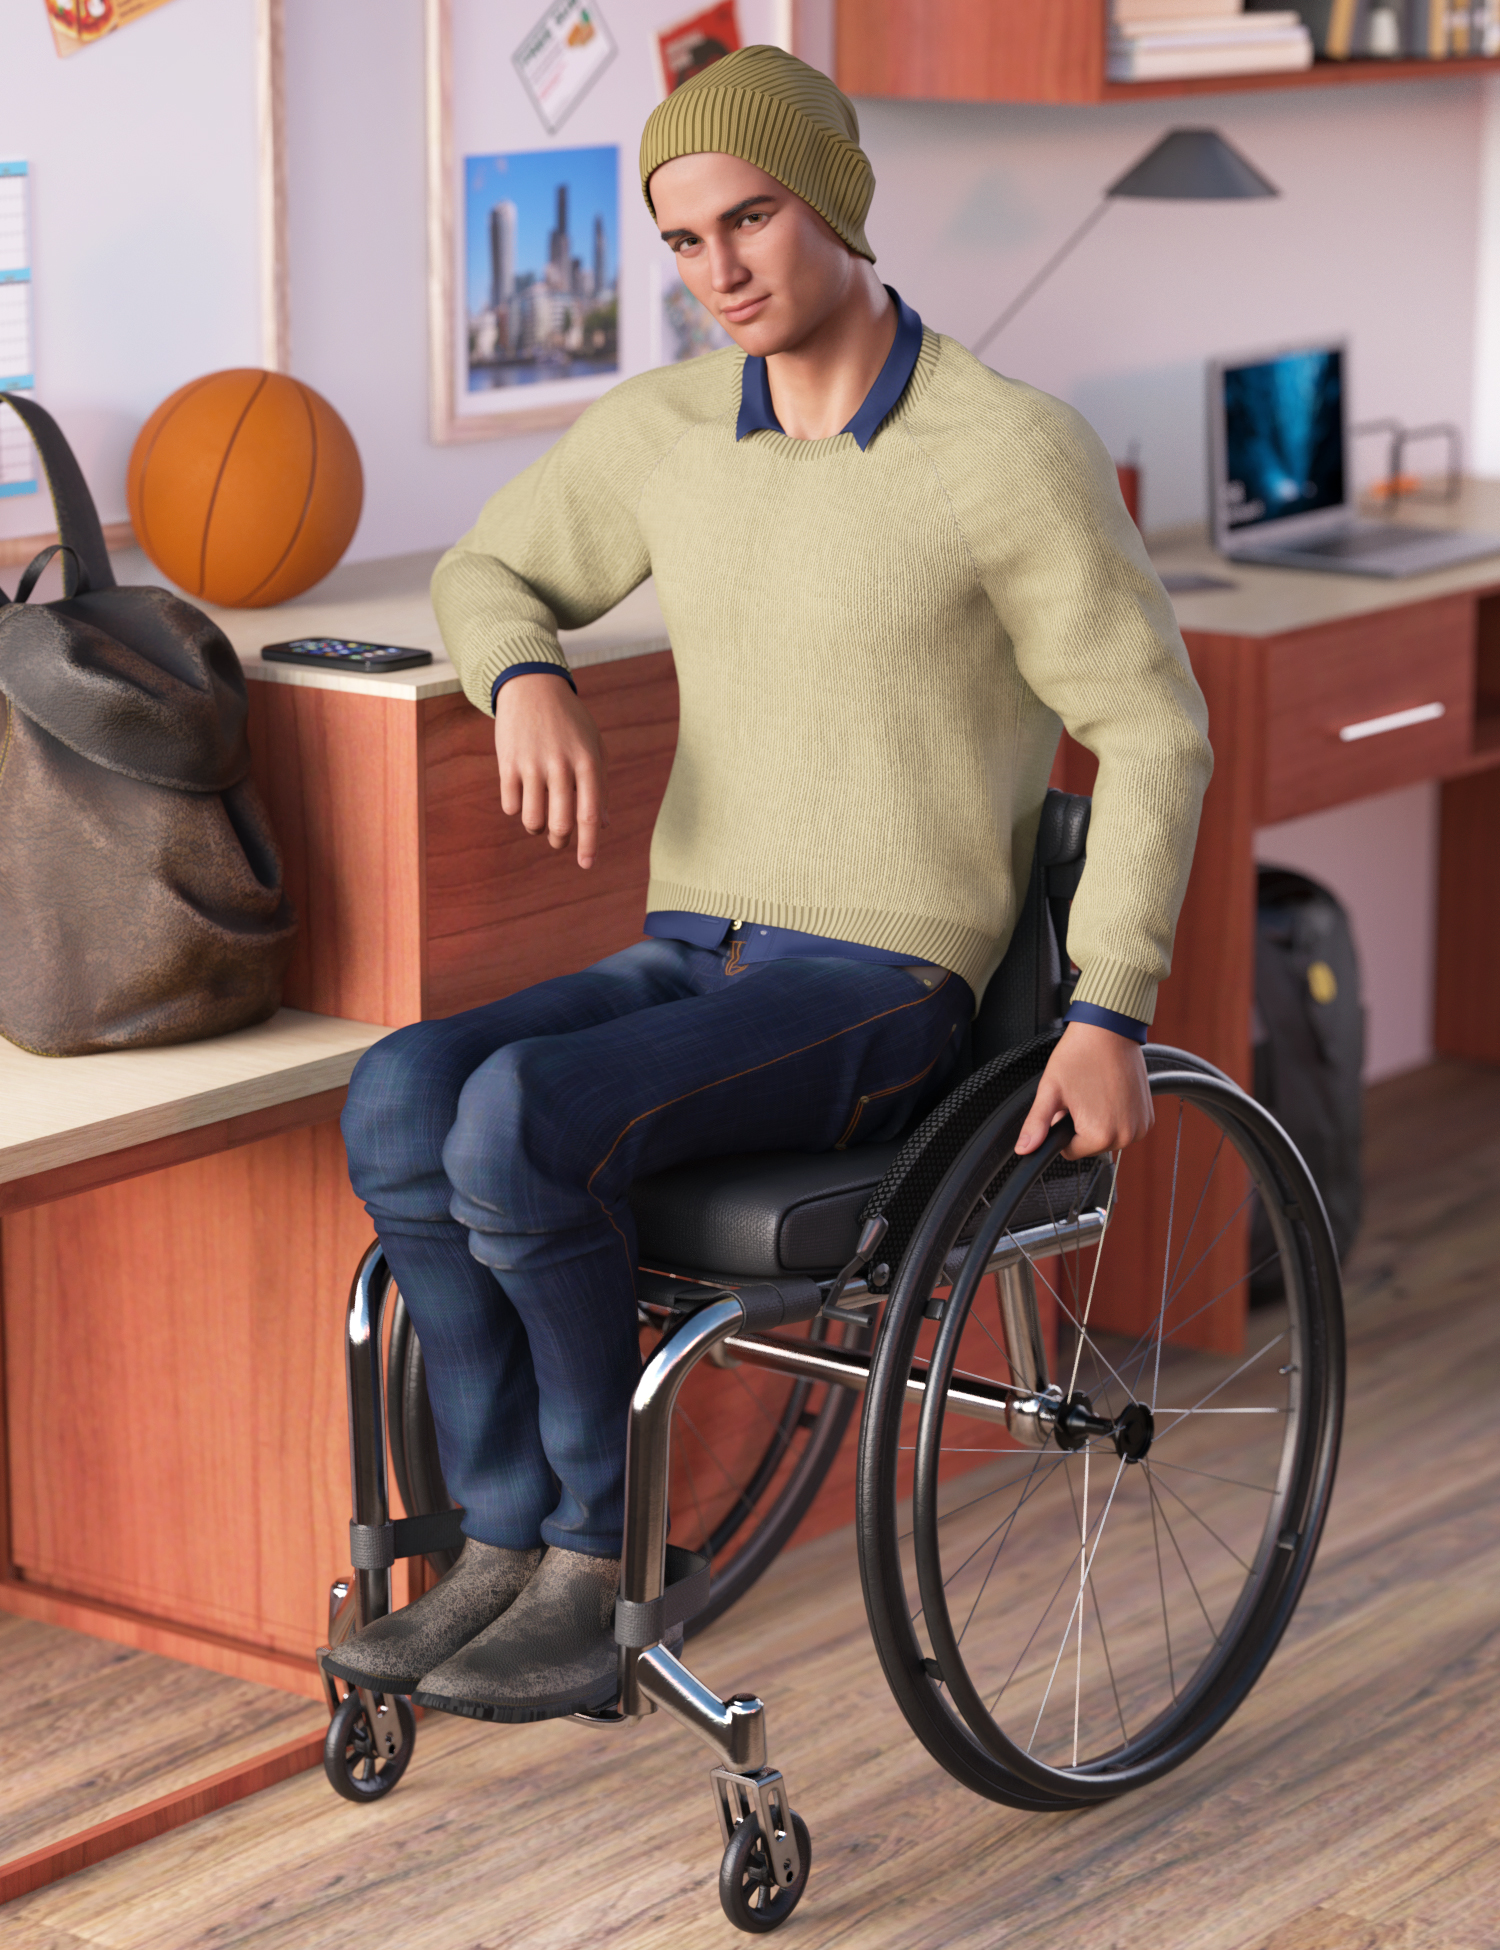 Streetscape Outfit for Genesis 8 and 8.1 Males by: MadaMoonscape GraphicsSade, 3D Models by Daz 3D